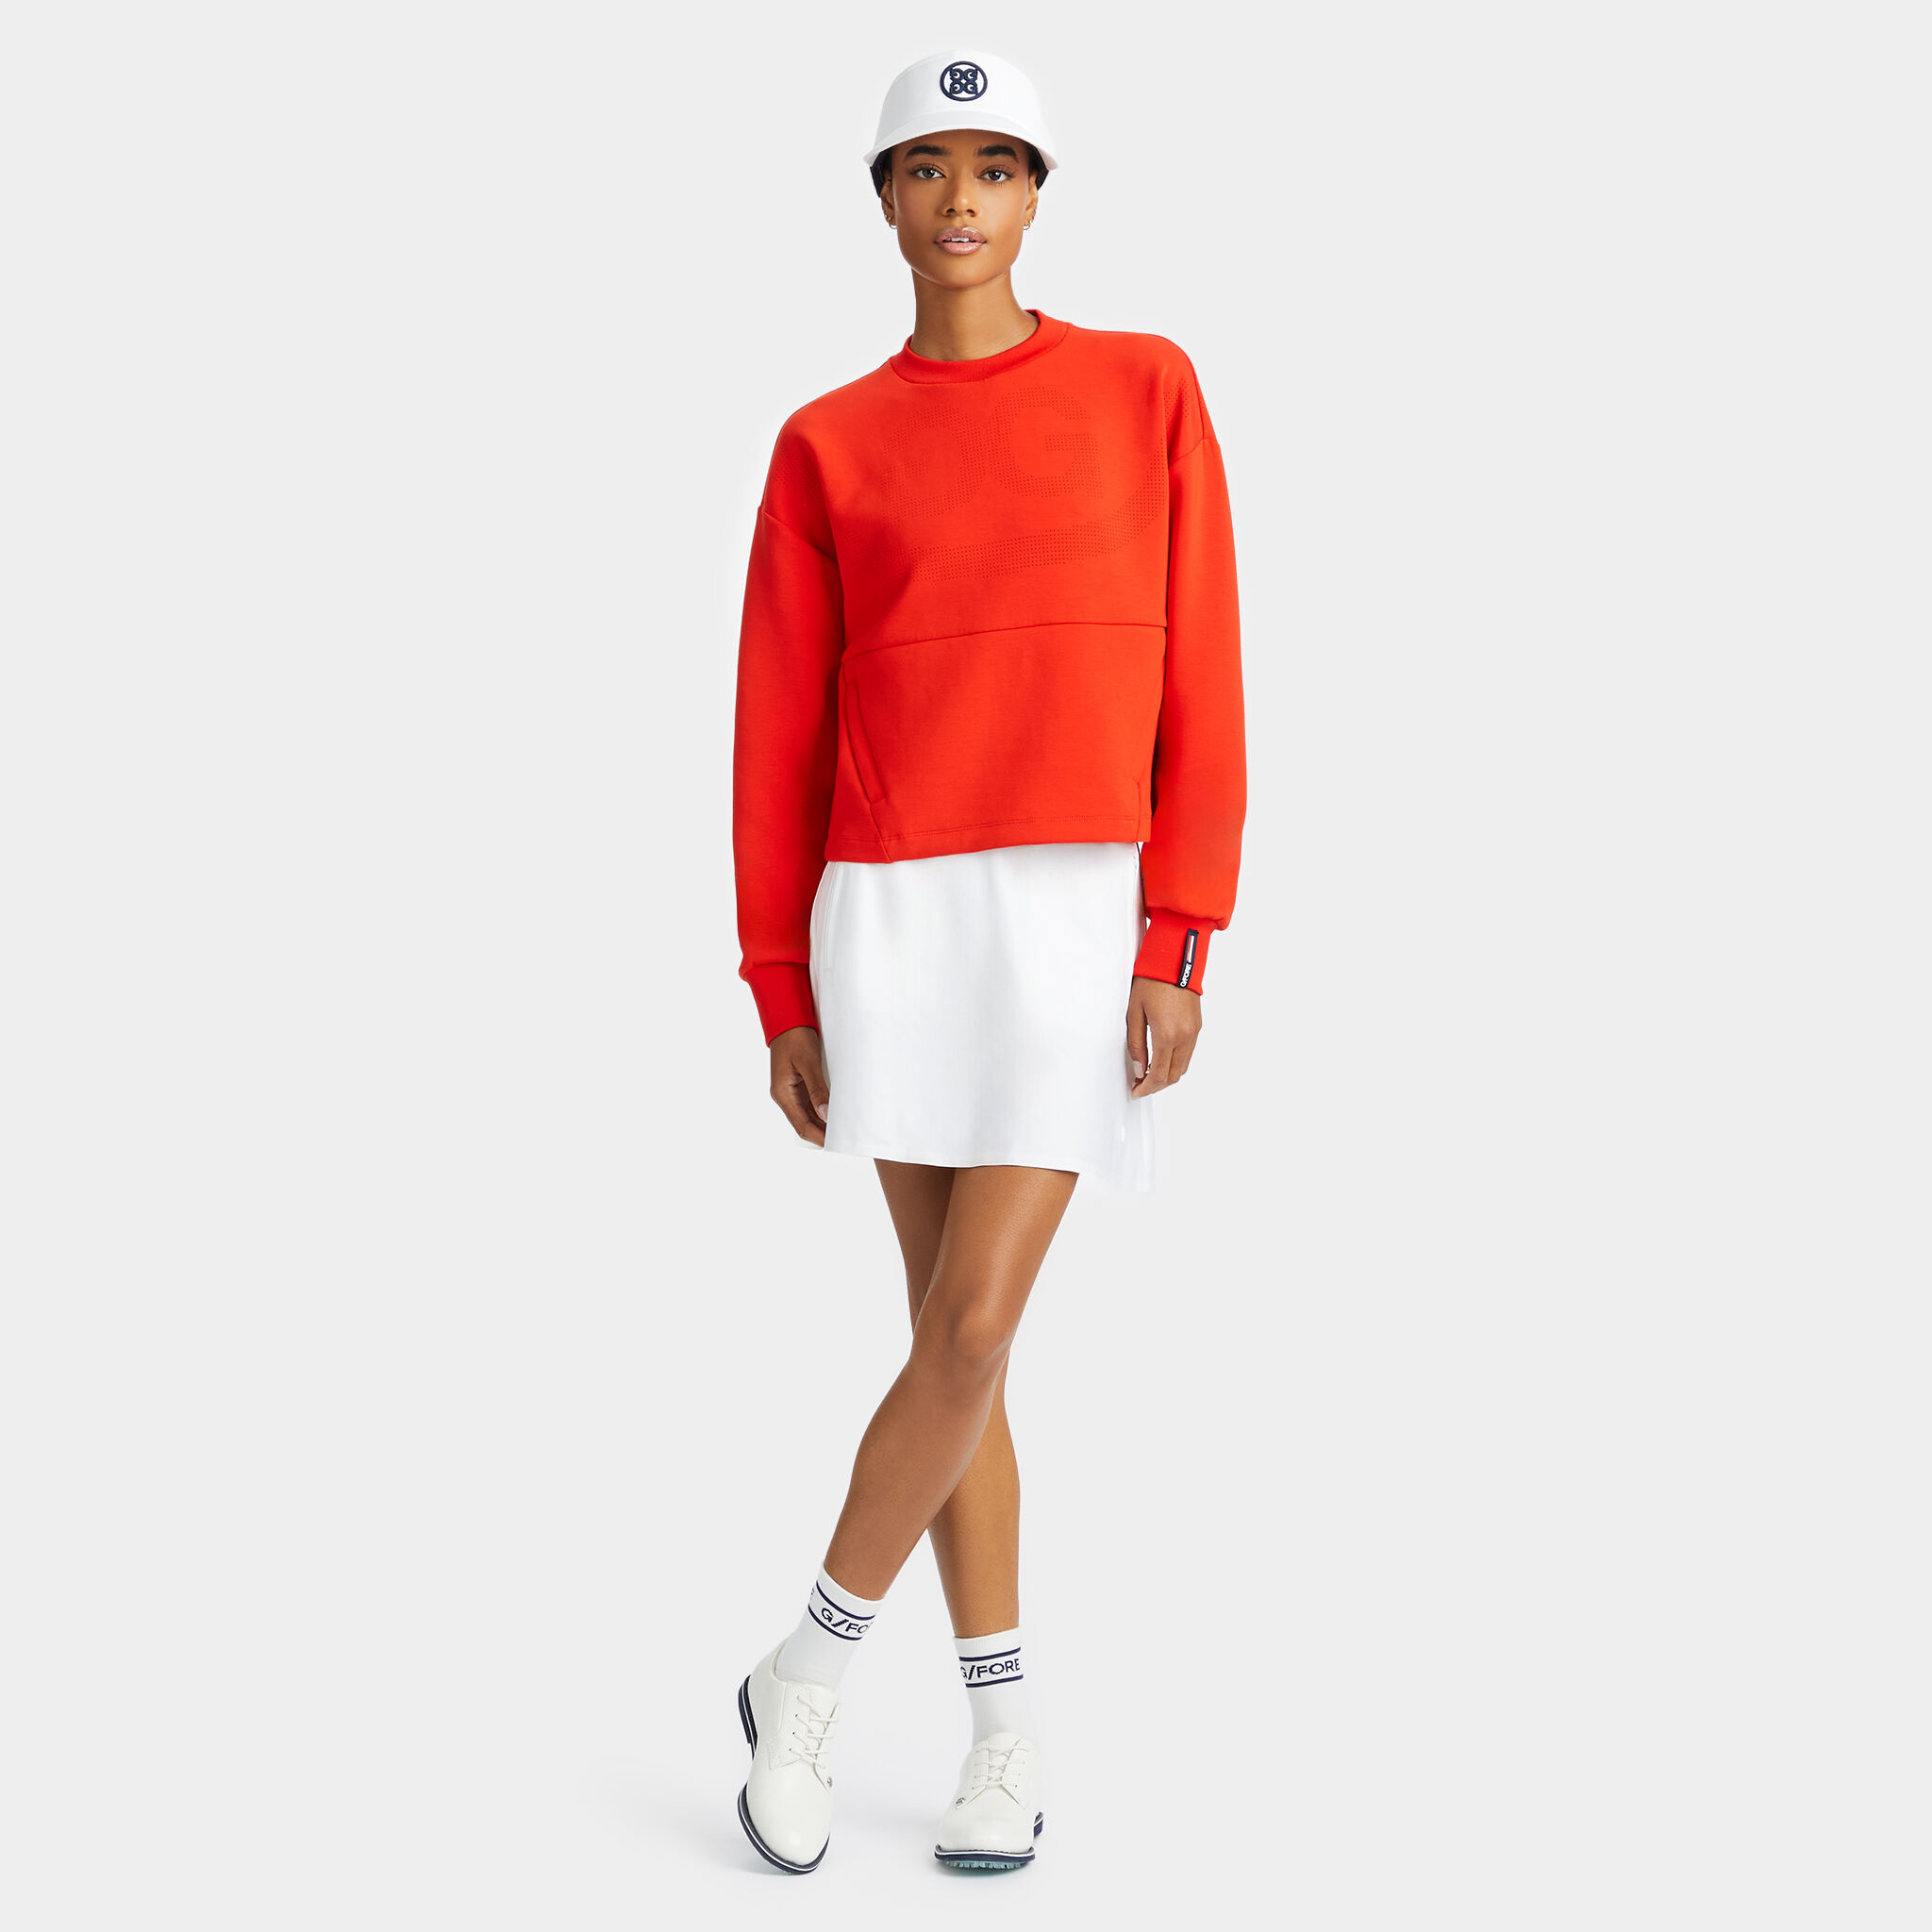 DOUBLE KNIT PERFORATED CIRCLE G'S OPS SWEATSHIRT | WOMEN'S 